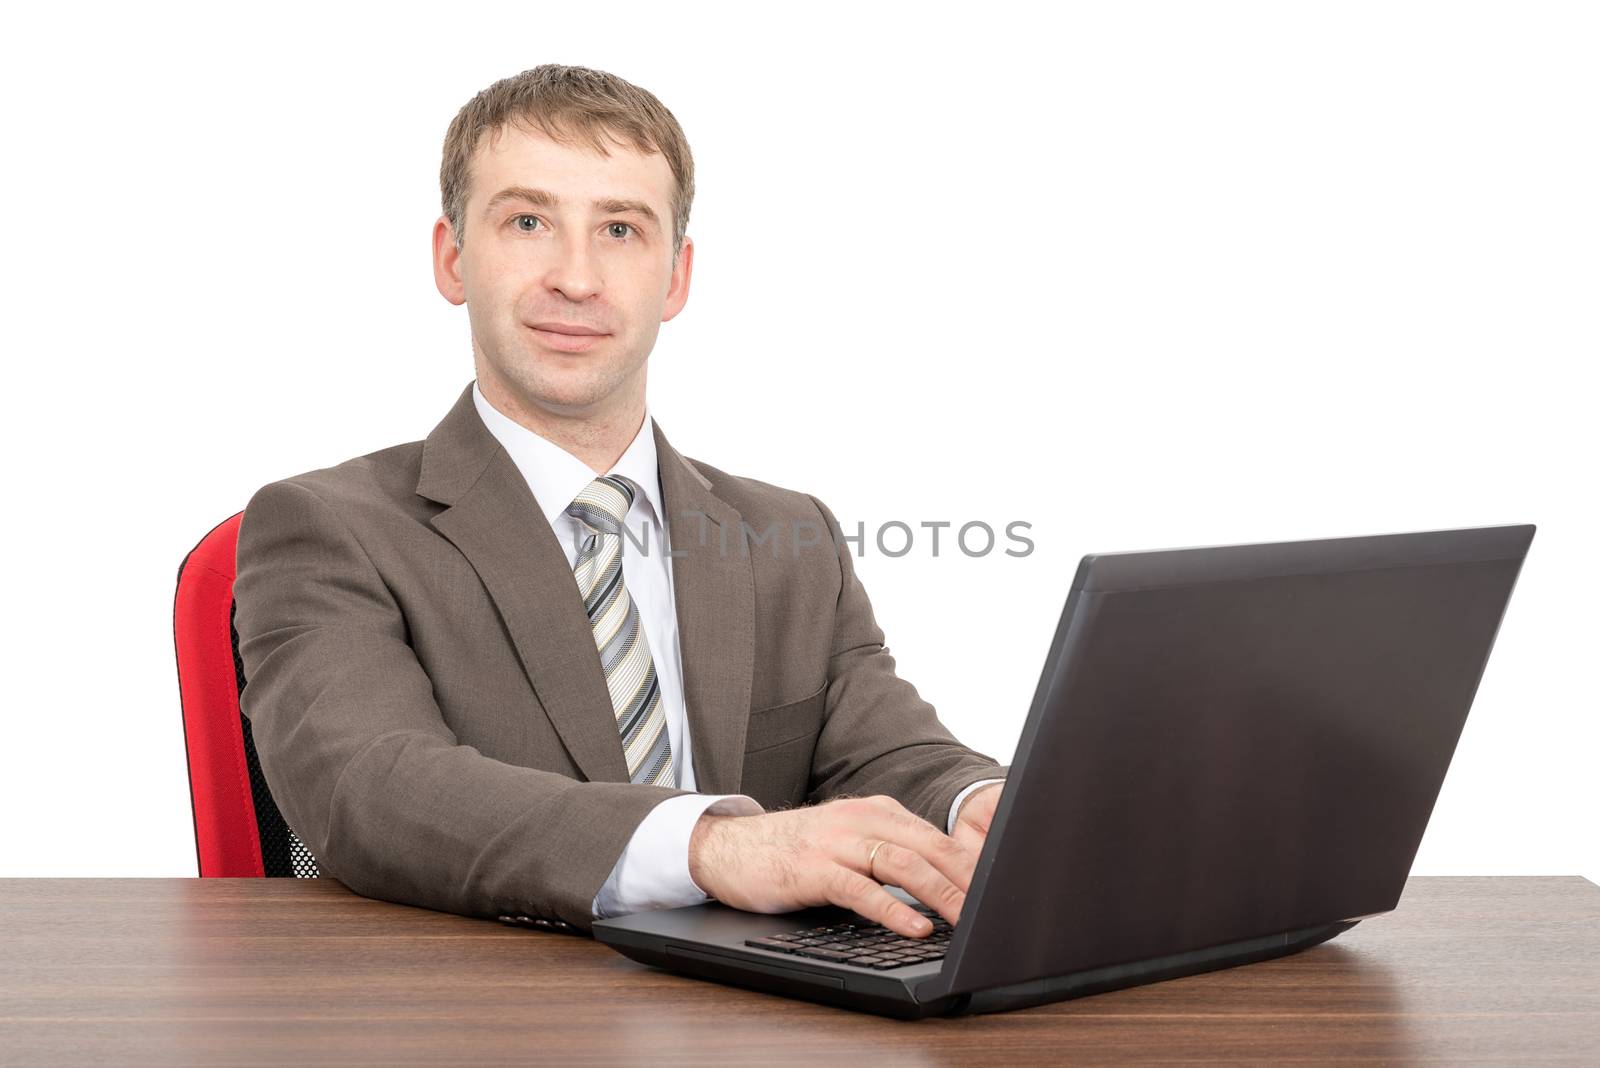 Businessman working on laptop and looking at camera isolated on white background